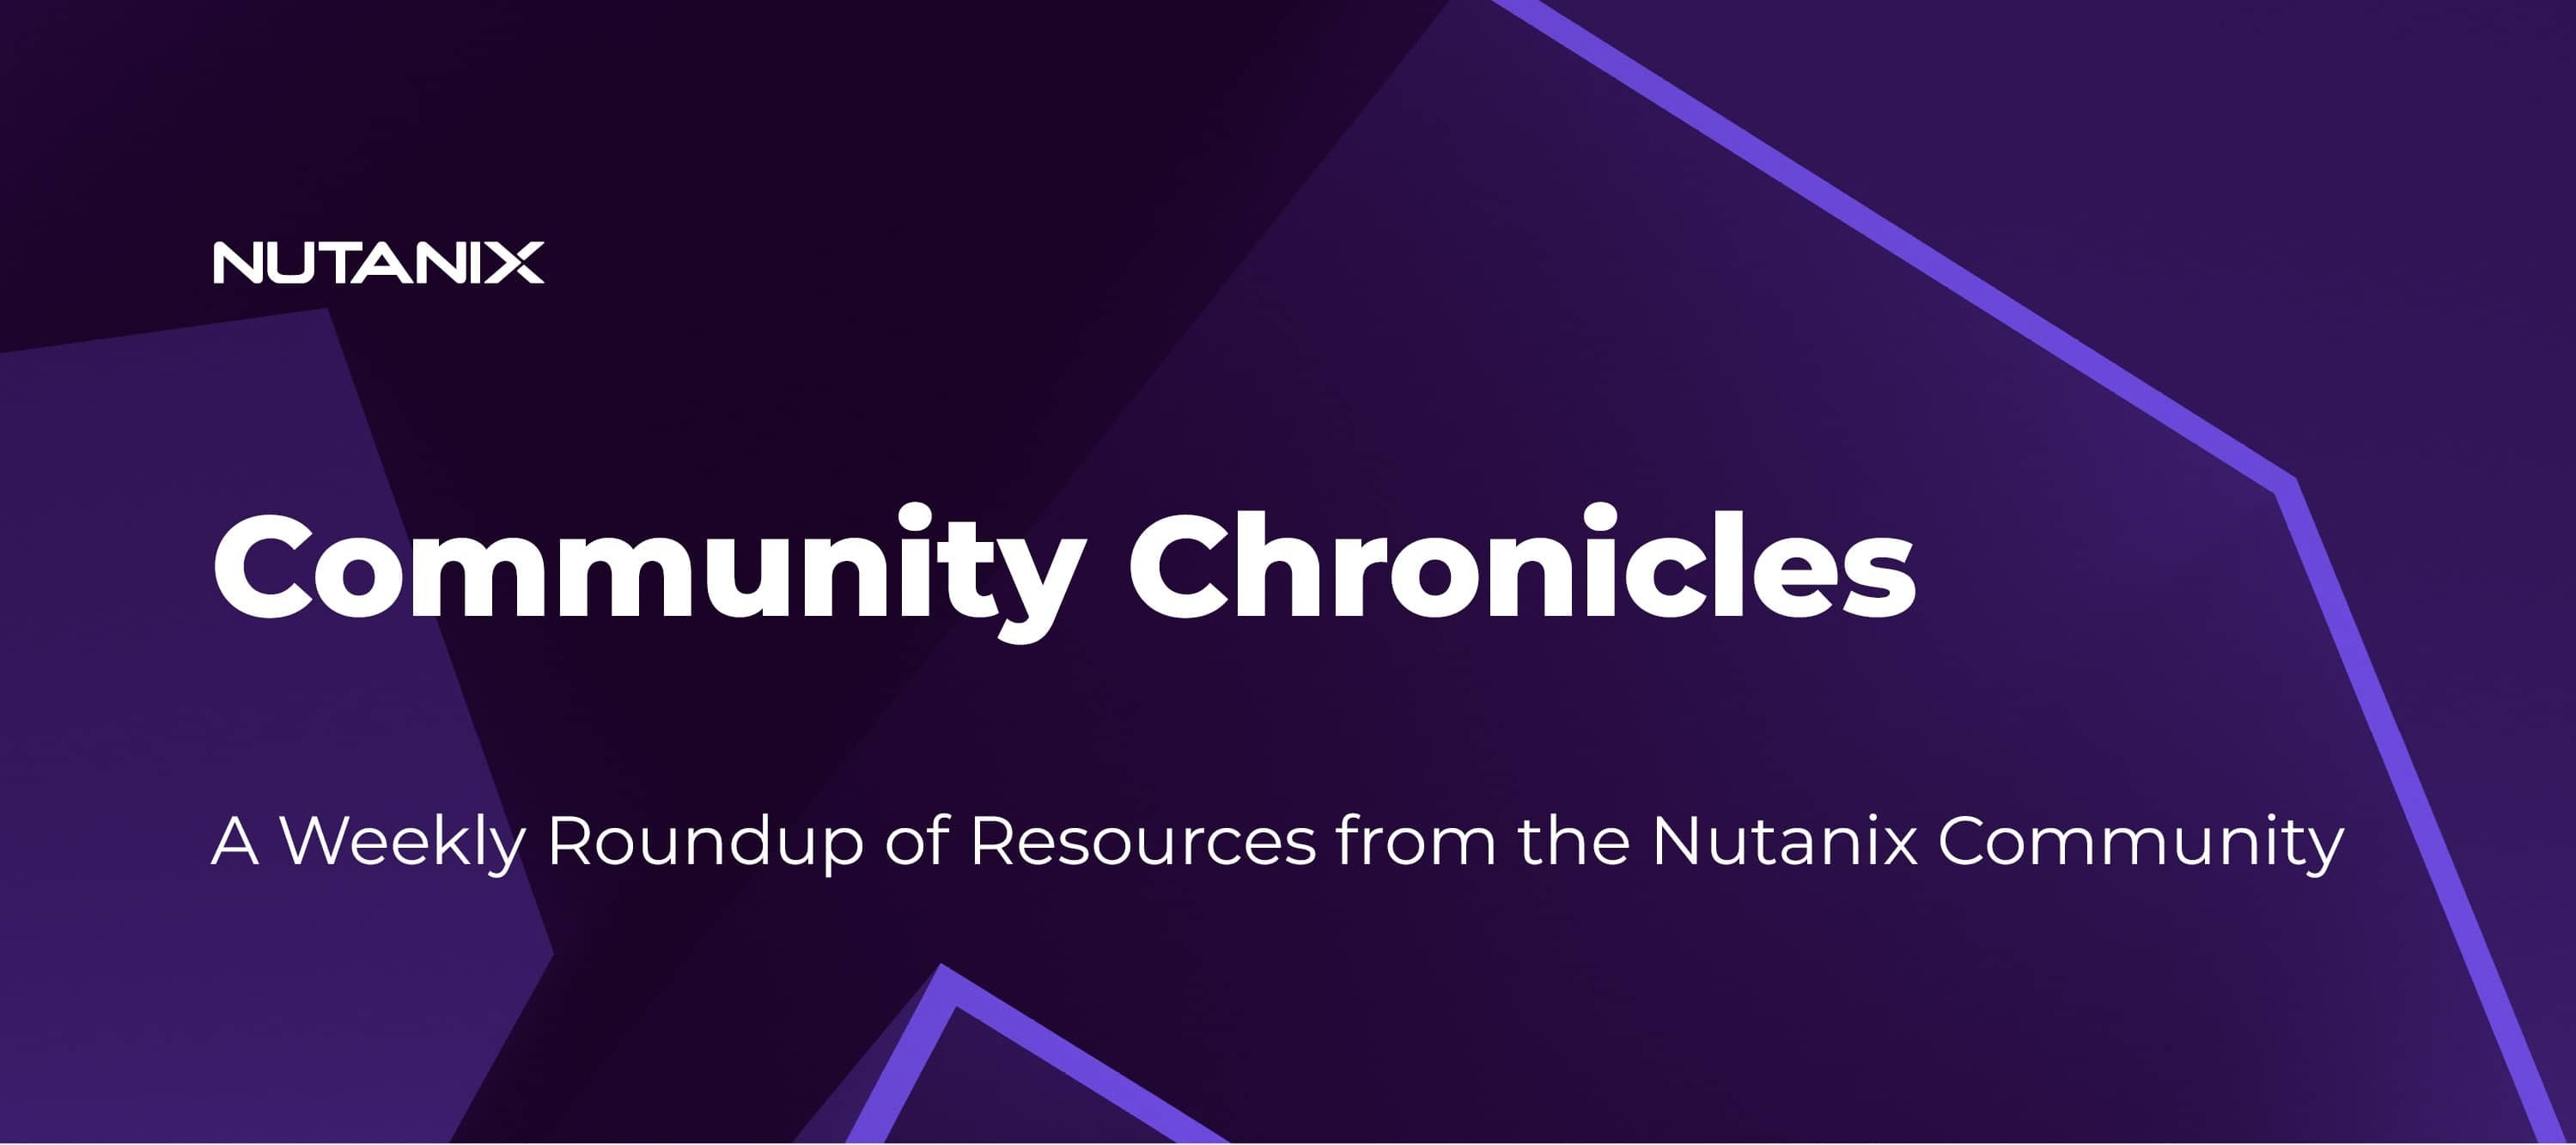 Community Chronicles: A Weekly Roundup from the Nutanix Community (March 12)